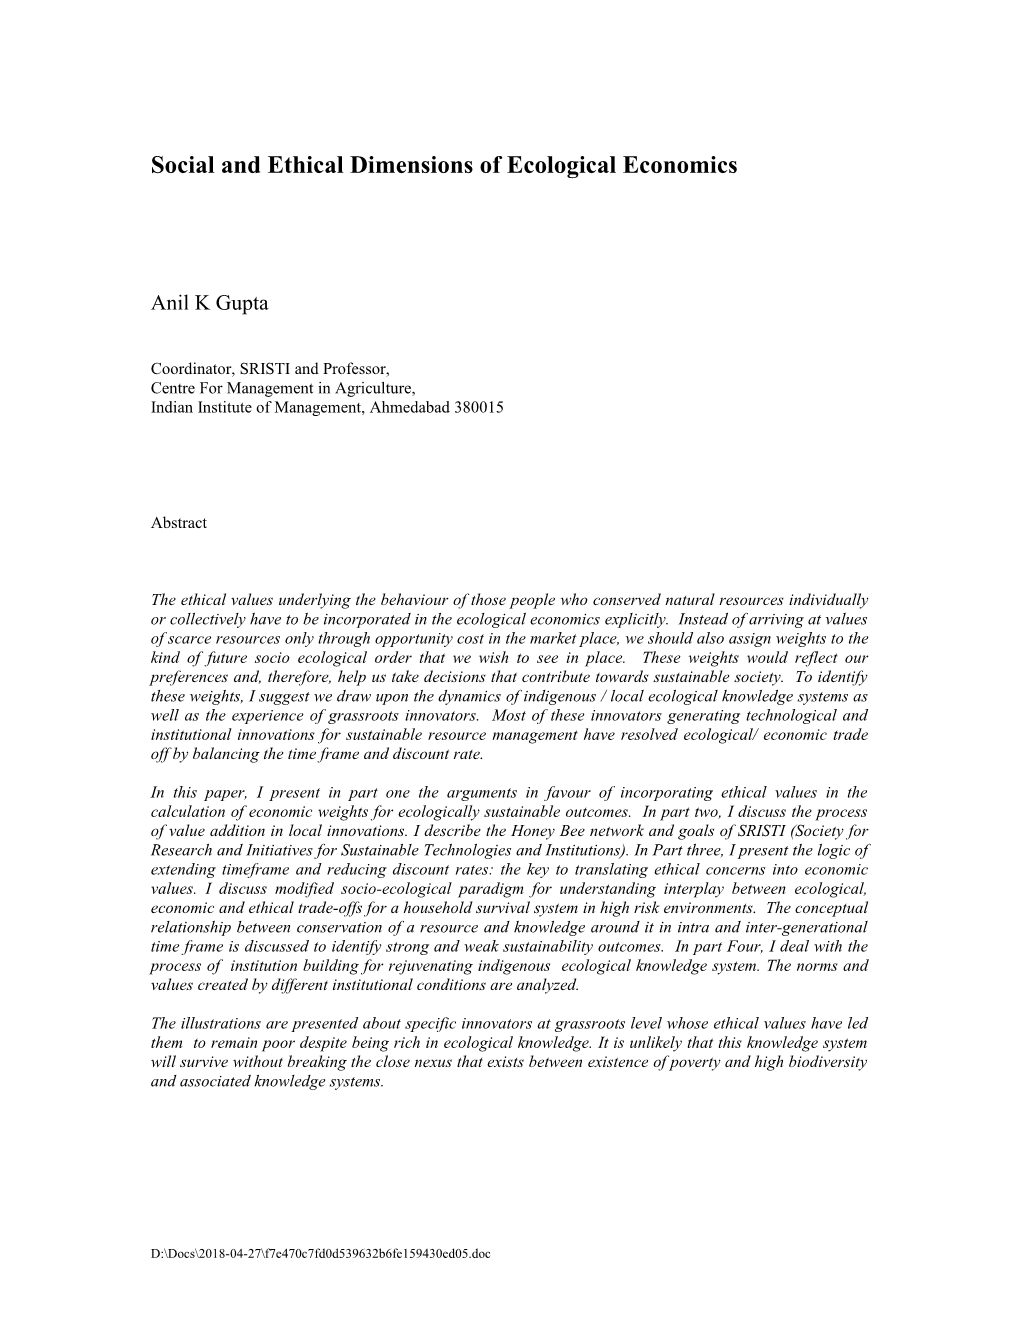 Social and Ethical Dimensions of Ecological Economics